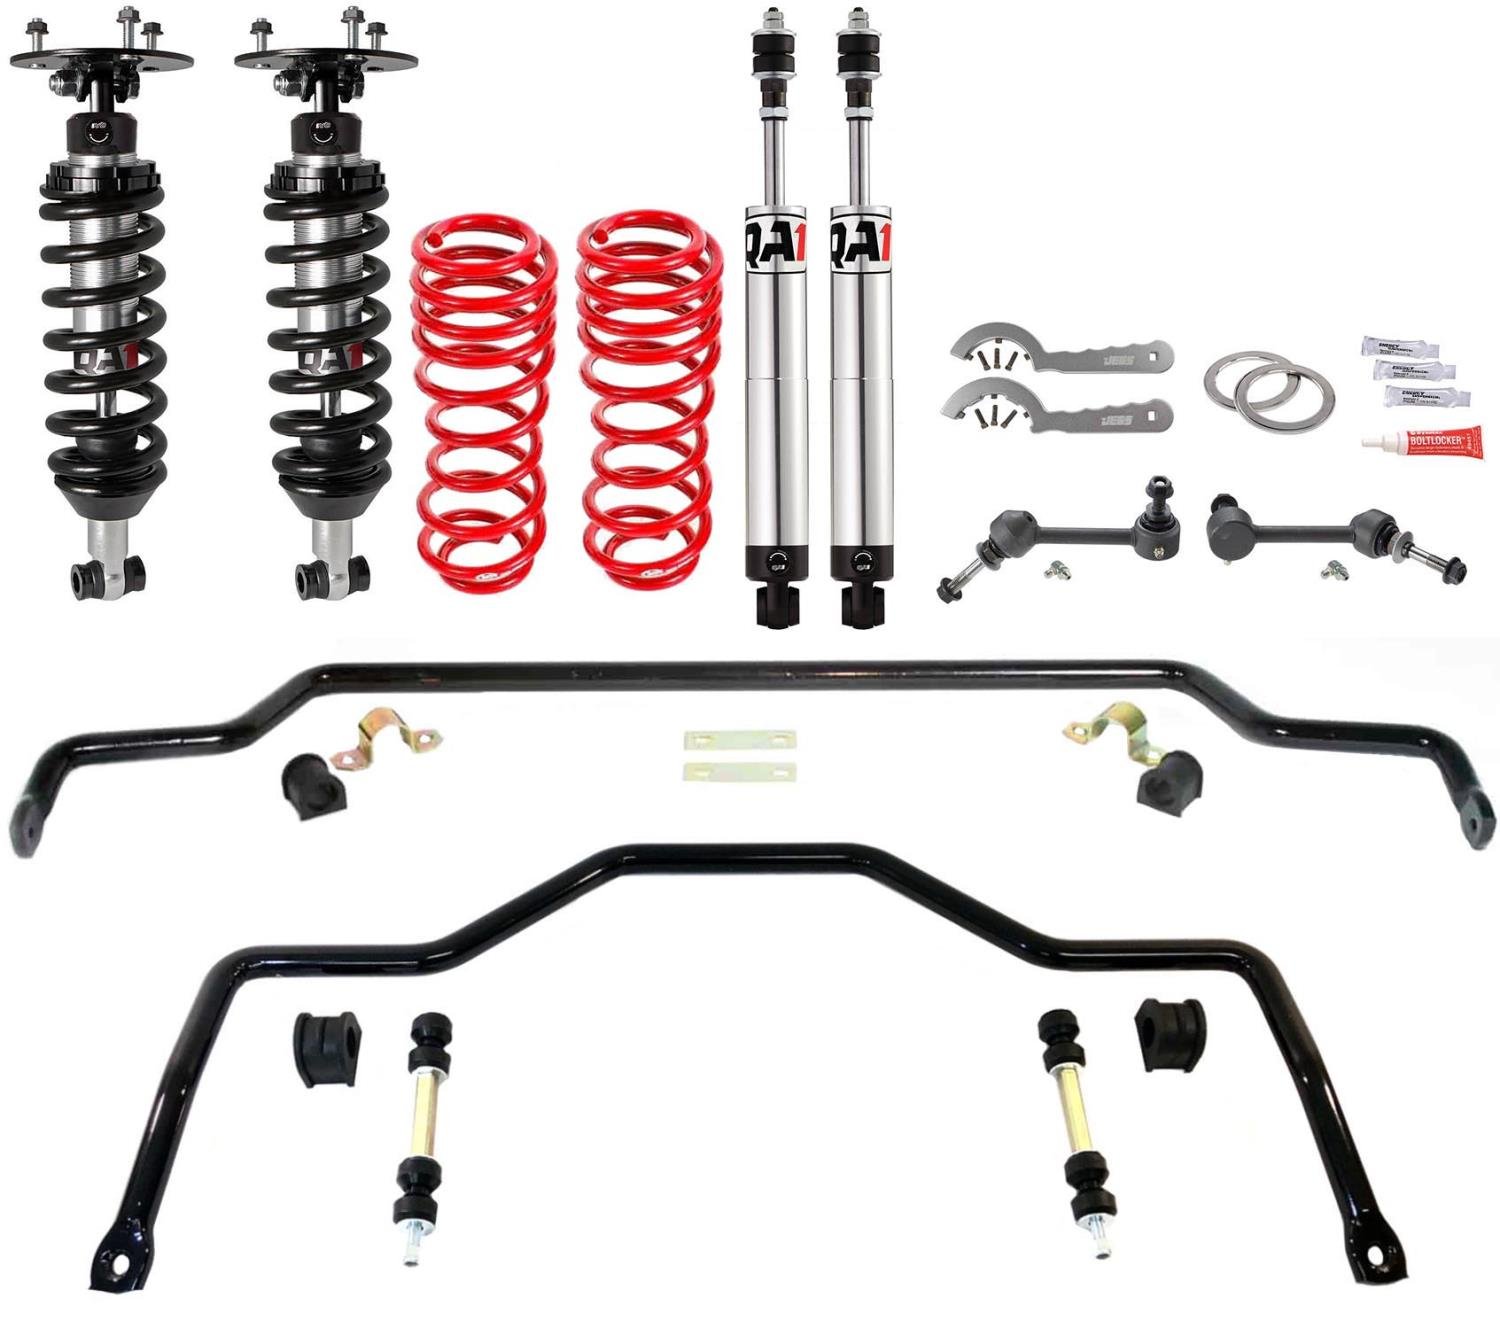 Pro Coil Coil-Over Handling Kit 2003-2011 Ford Crown Victoria, Ride Height: 0-2 in. Front Lowered, -3.500 in. Rear Lowered